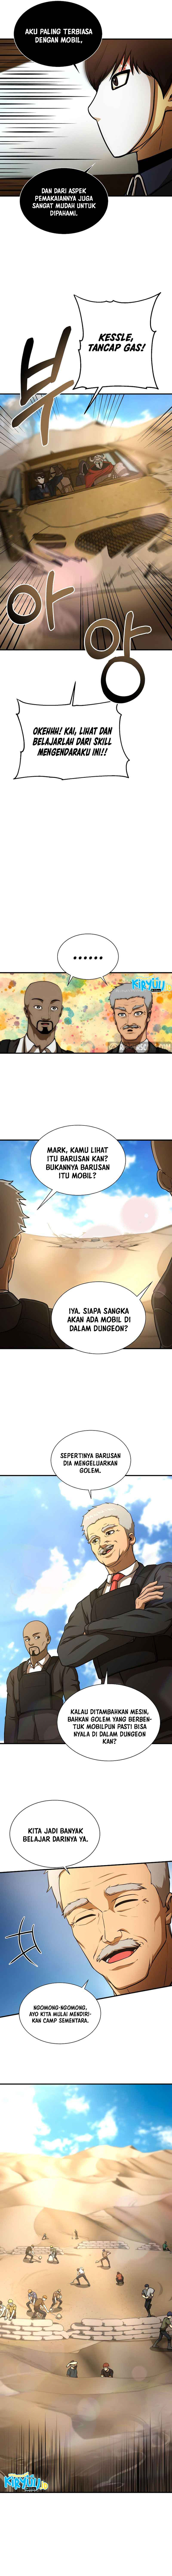 It’s Dangerous Outside My House [Dungeon House] Chapter 48